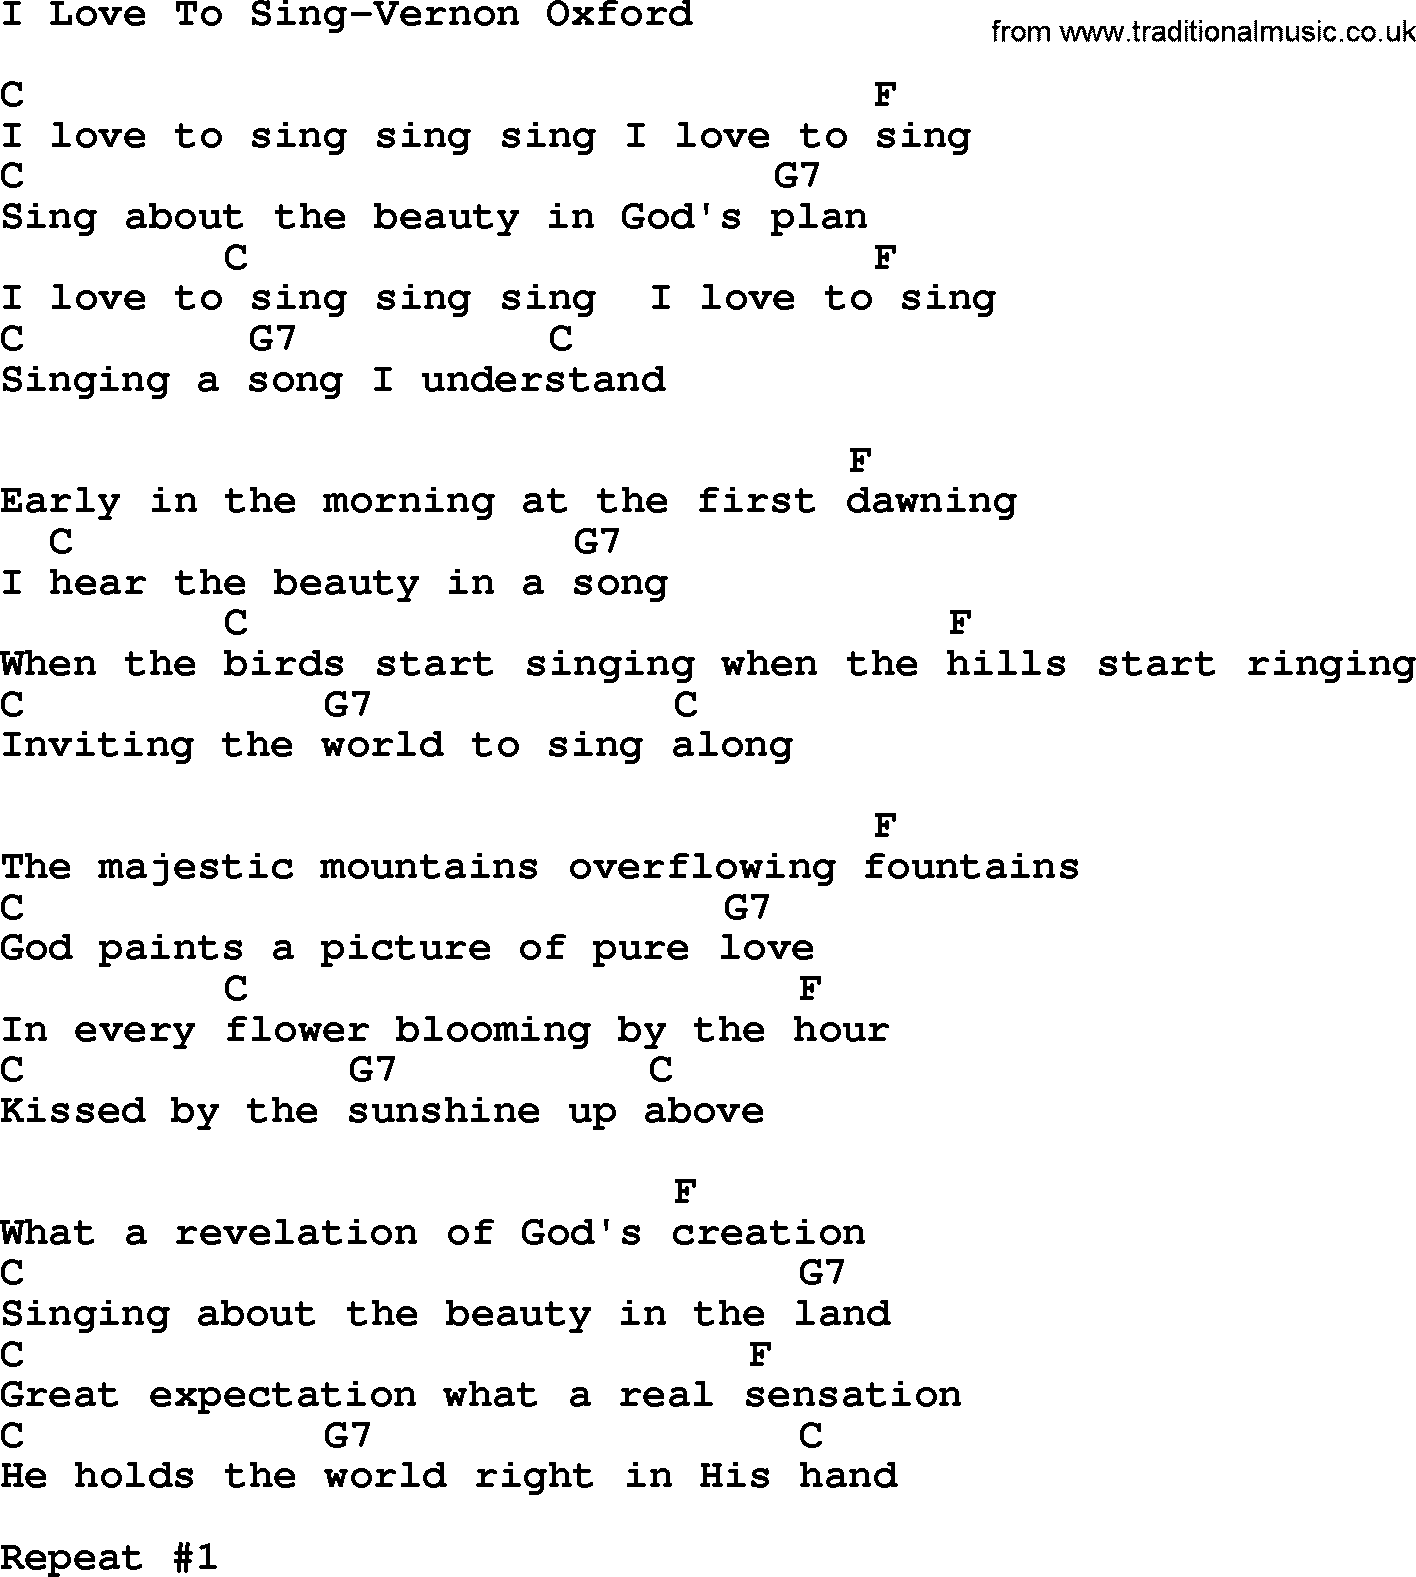 Country music song: I Love To Sing-Vernon Oxford lyrics and chords